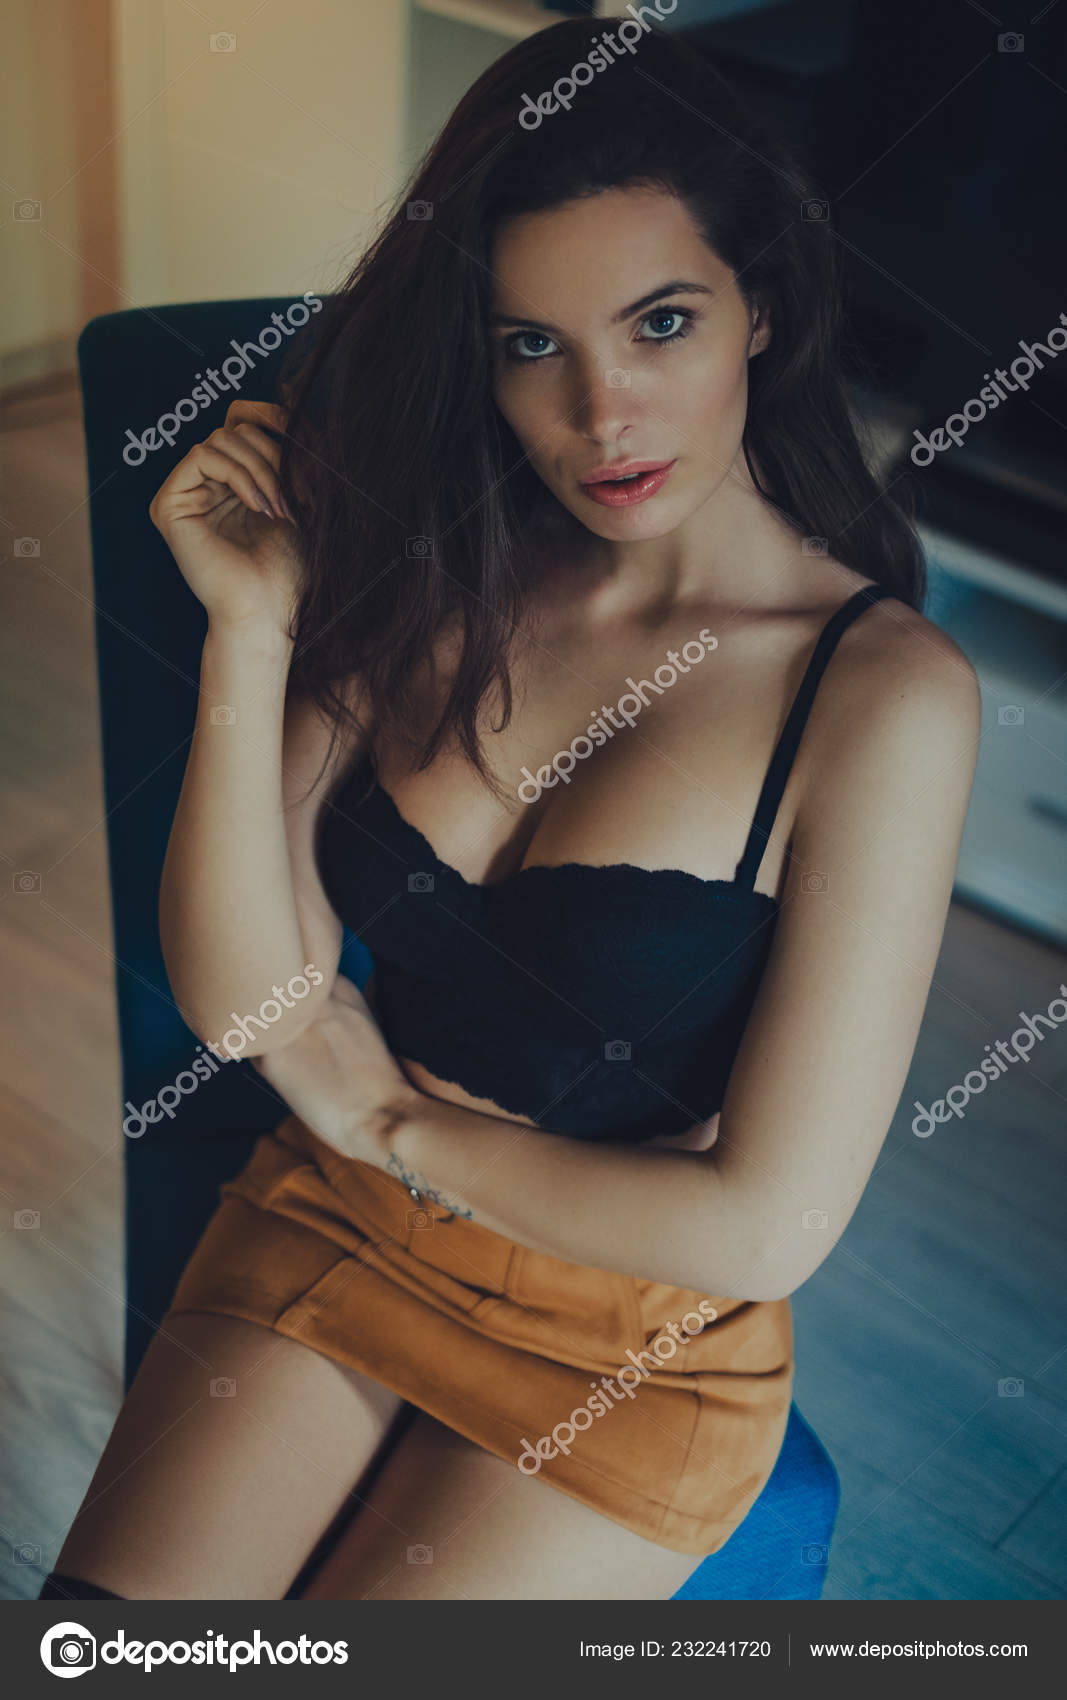 Sexy girl in bra and skirt sitting on a chair Stock Photo by  ©sasamihajlovic 232241720